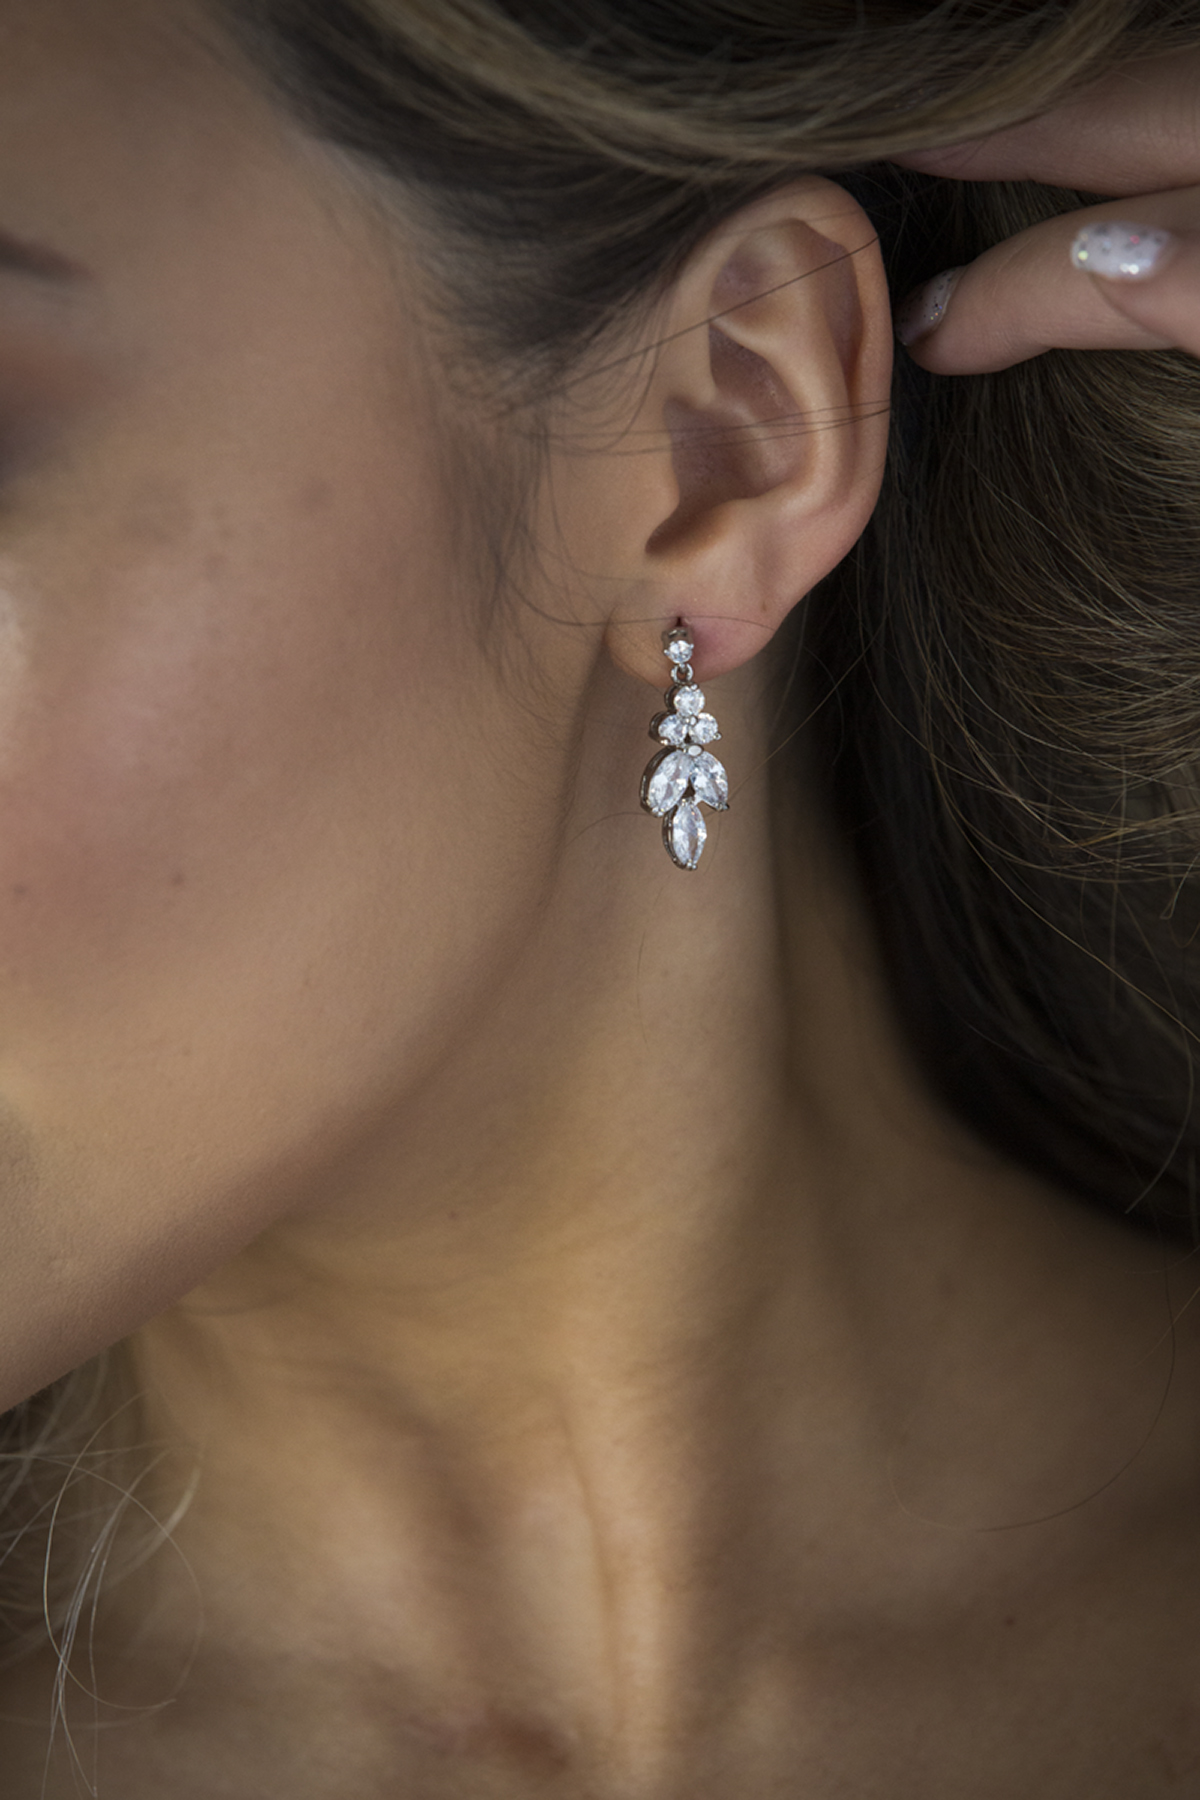 You will feel like the glamorous bride you deserve to be with these regal crystal and silver teardrop earrings. A classic and beautiful design that has been crafted with careful attention to detail. The crystals hang delicately giving a soft and romantic feel and are one of our most popular designs.